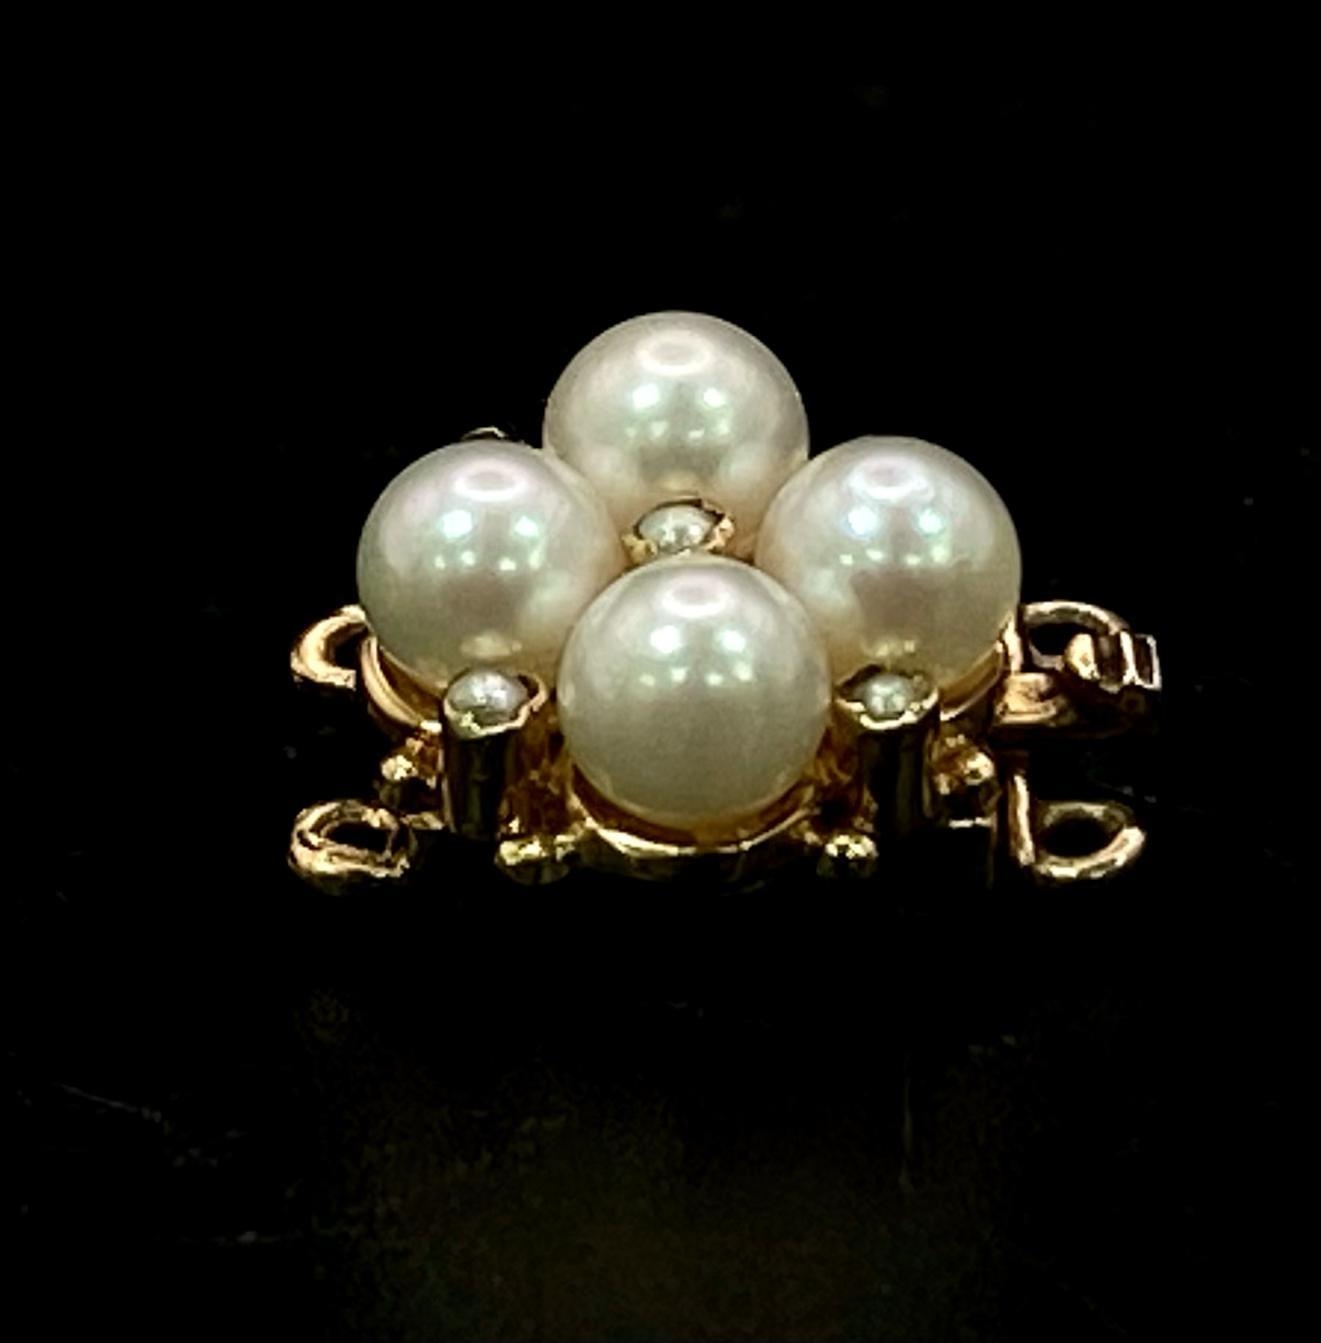 A Vintage 9K Yellow Gold and Seed Pearl Jewellery Clasp. Perfect for a four-strand necklace. 17mm. - Image 2 of 5